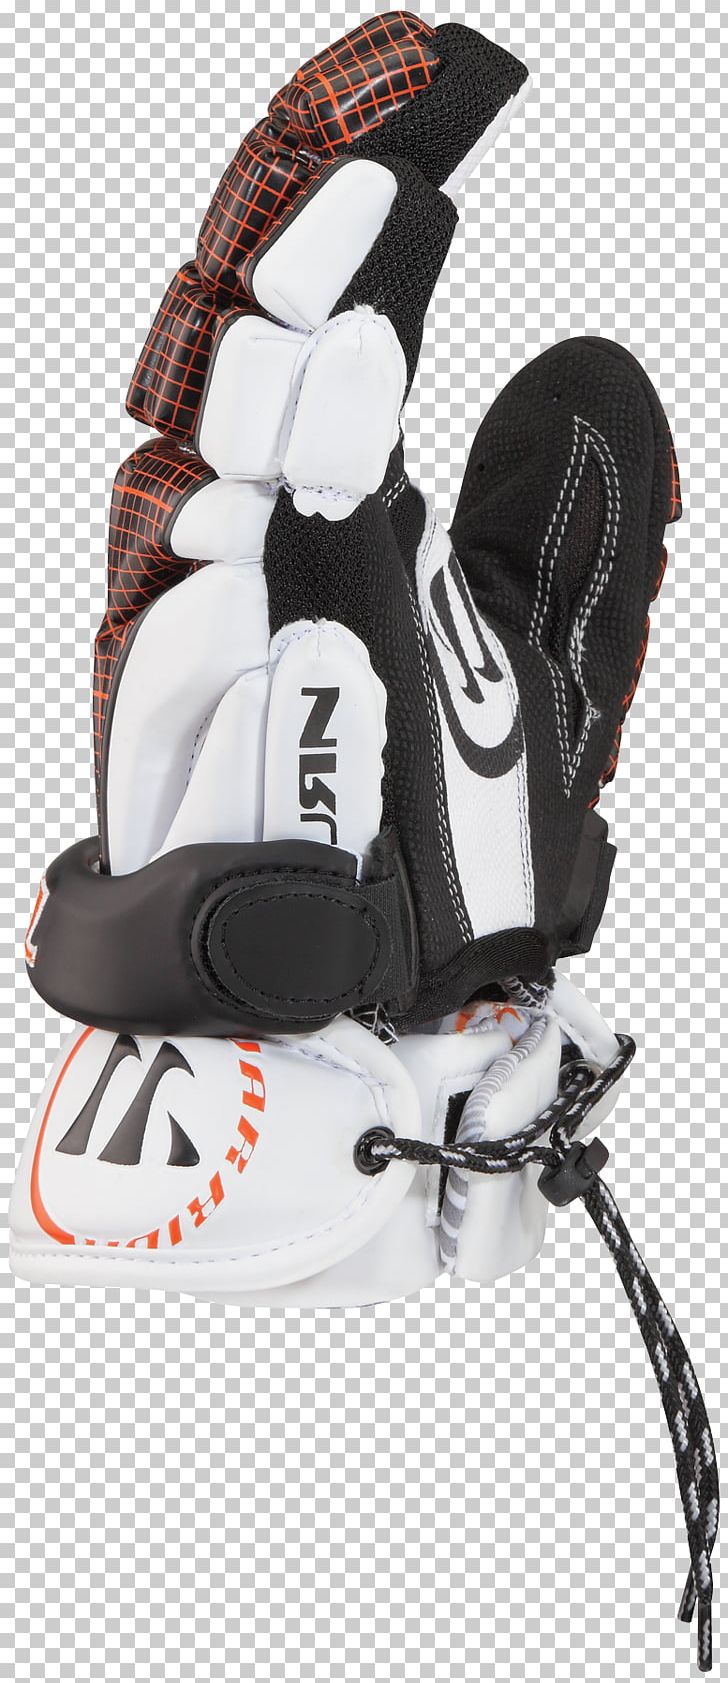 Lacrosse Glove Clothing Accessories Cross-training Sporting Goods PNG, Clipart, Clothing Accessories, Crosstraining, Fashion, Fashion Accessory, Footwear Free PNG Download